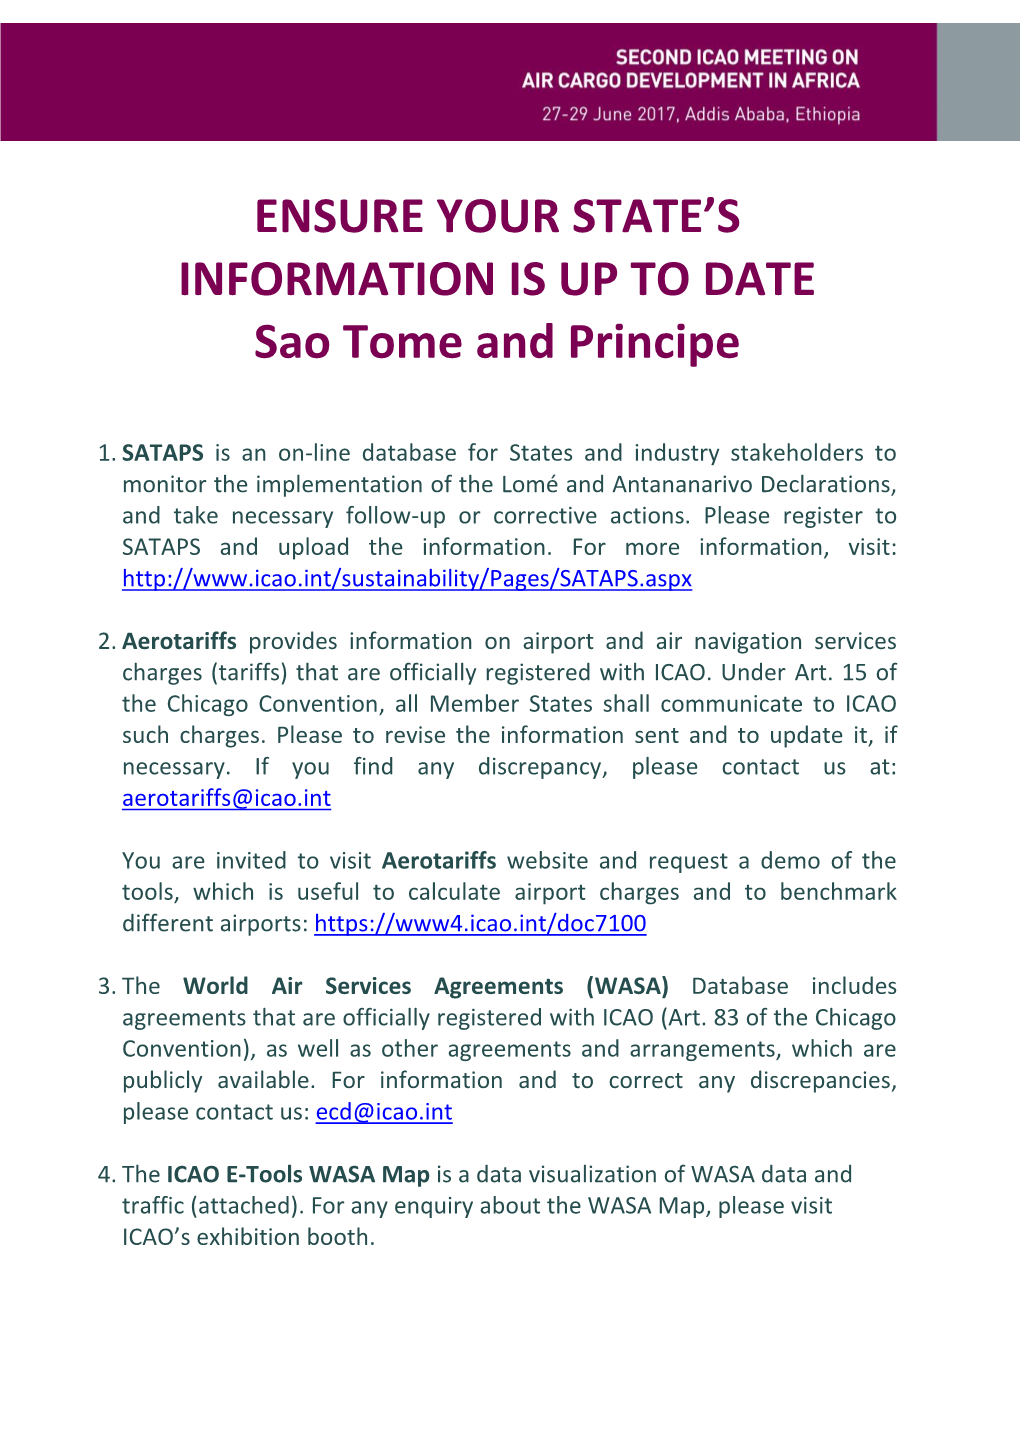 ENSURE YOUR STATE's INFORMATION IS up to DATE Sao Tome and Principe